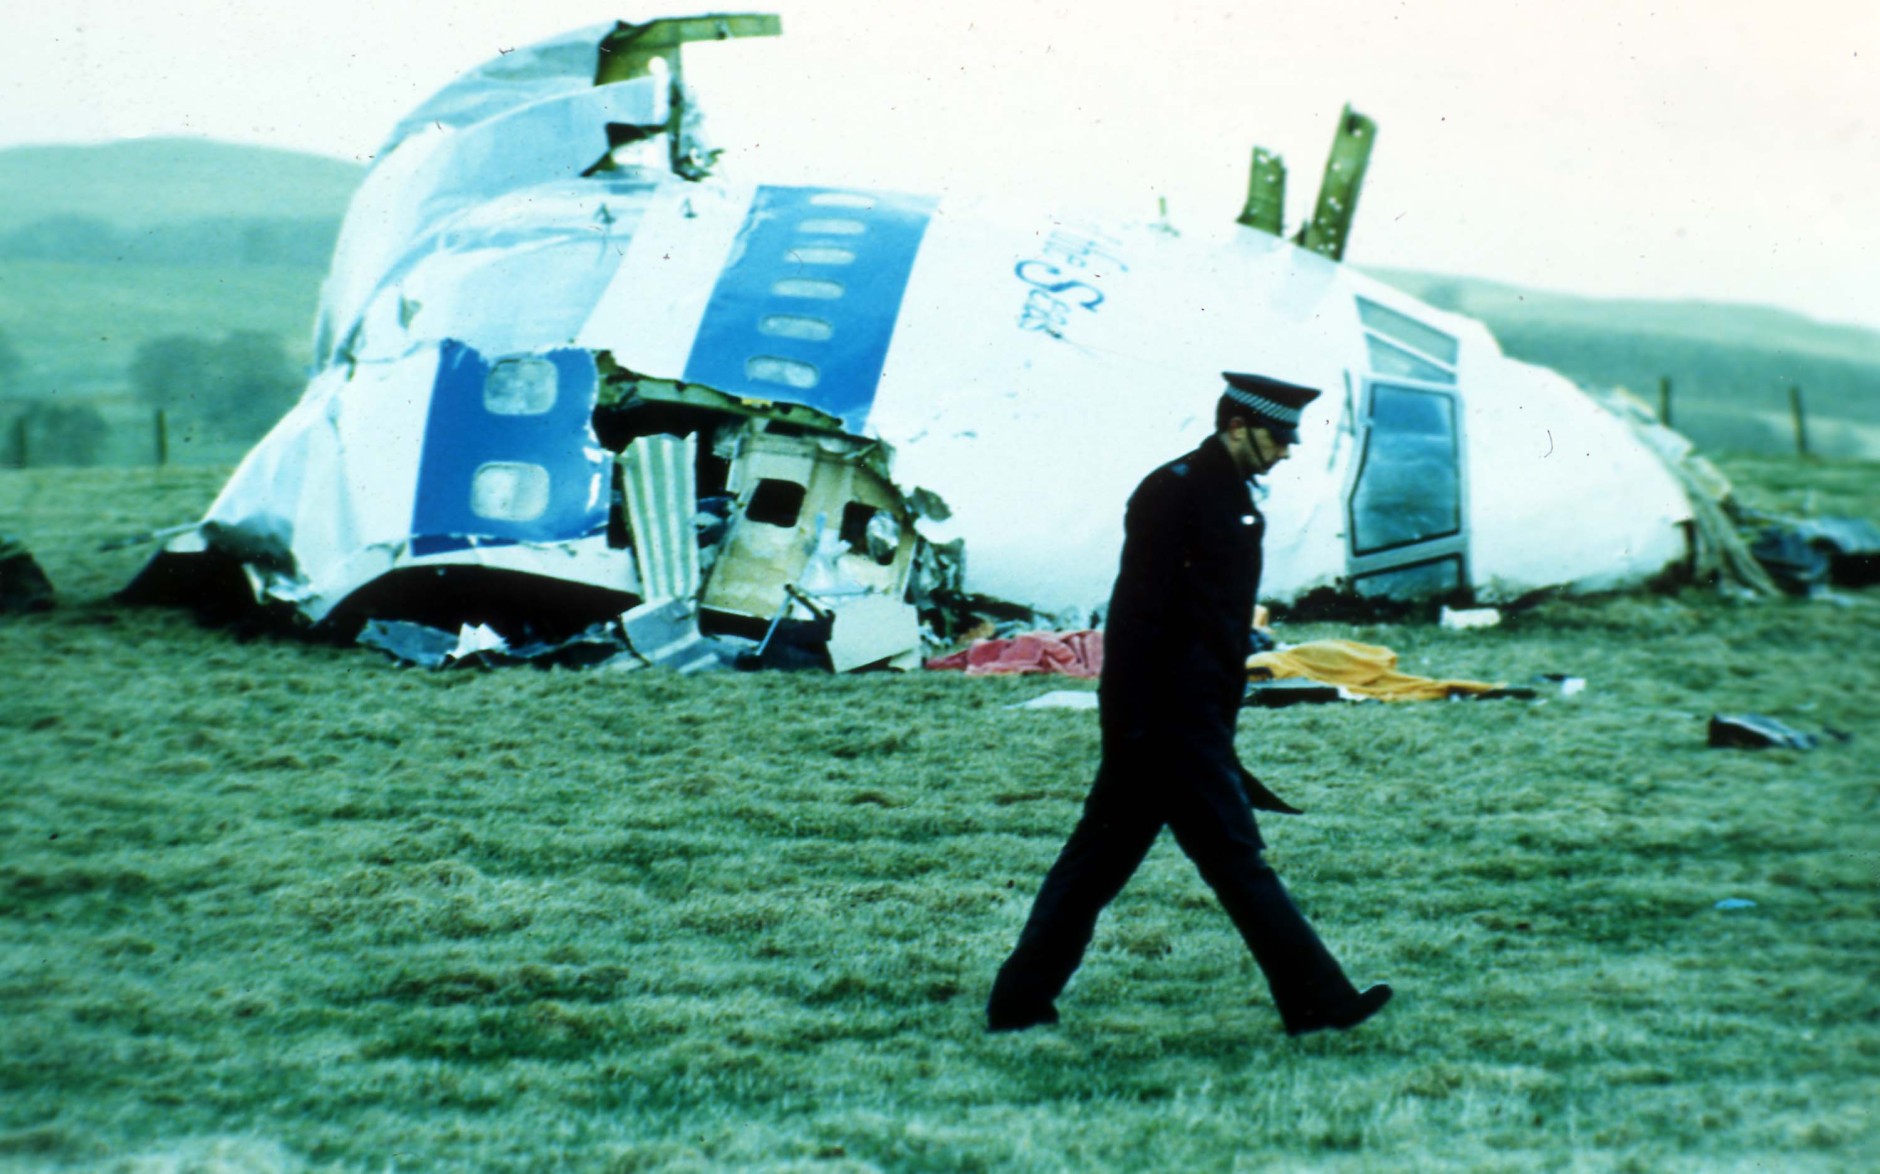 On Dec. 21, 1988, Pan Am Flight 103 from London's Heathrow International Airport to New York's John F. Kennedy International Airport was destroyed and the remains landed in and around the town of Lockerbie, Scotland. Forensic experts determined that plastic explosive had been detonated in the Boeing 747-121 forward cargo hold. The death toll was 270 people from 21 countries, including 11 people in the town of Lockerbie. (Ap Photo)